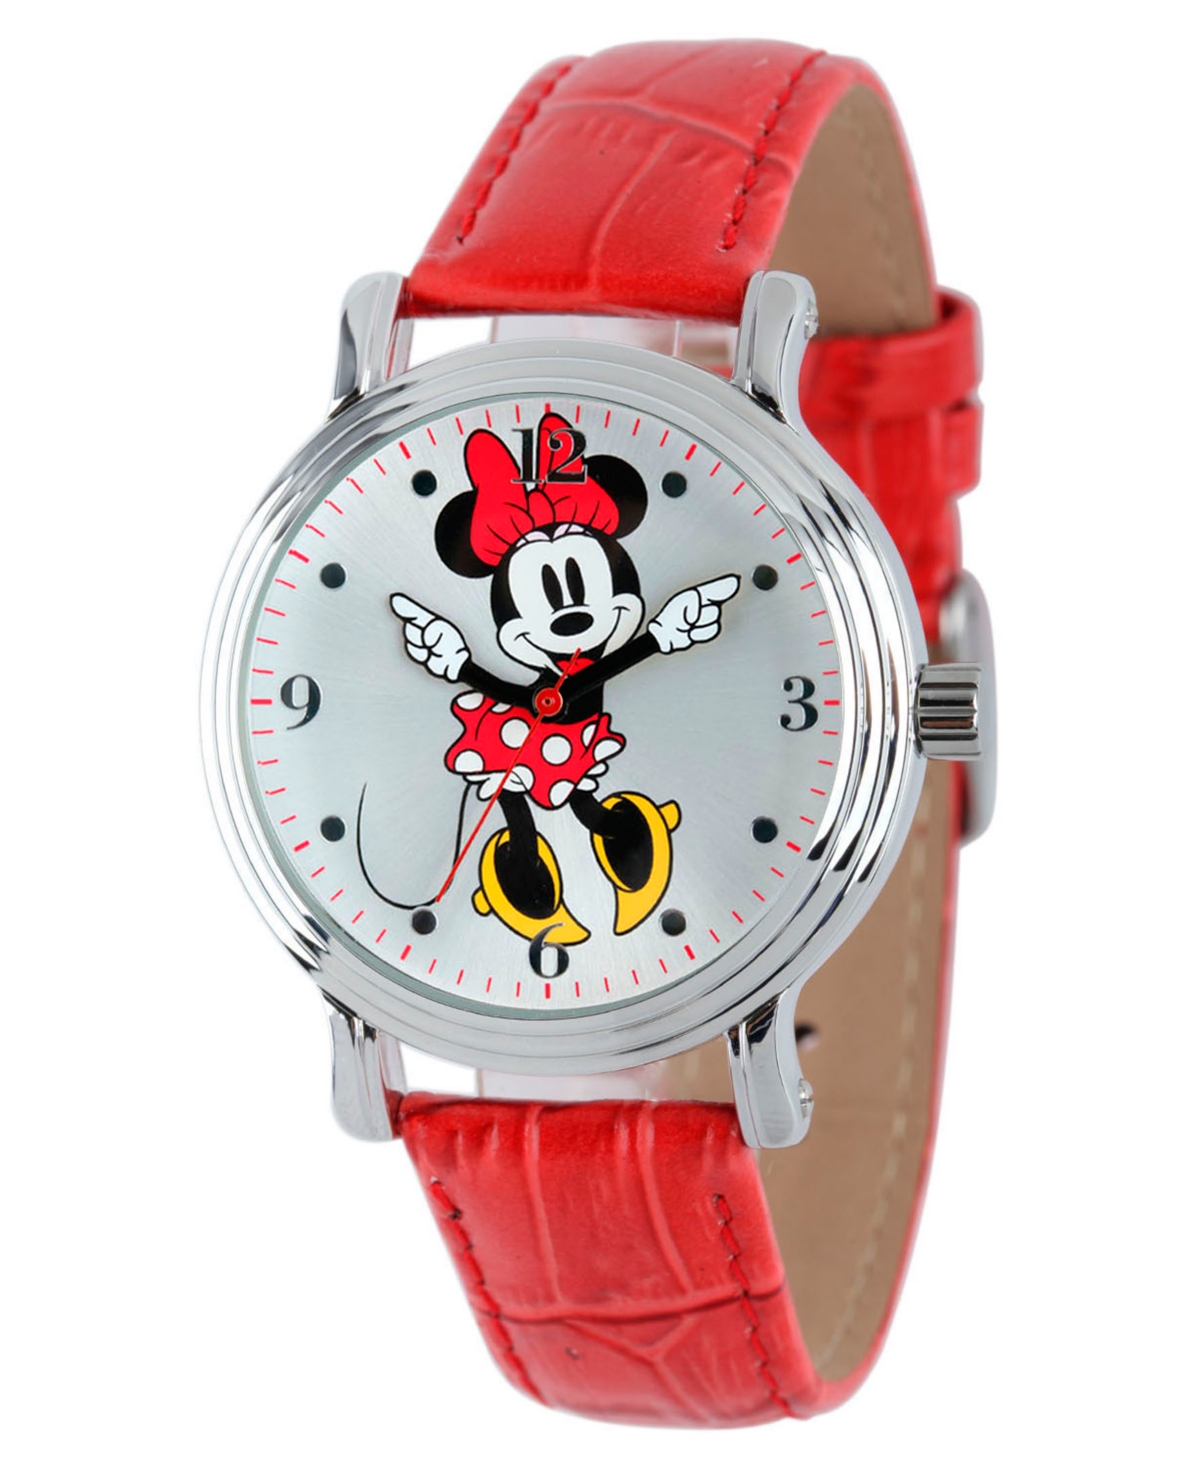 Disney Minnie Mouse Women's Shiny Silver Vintage Alloy Watch - Red